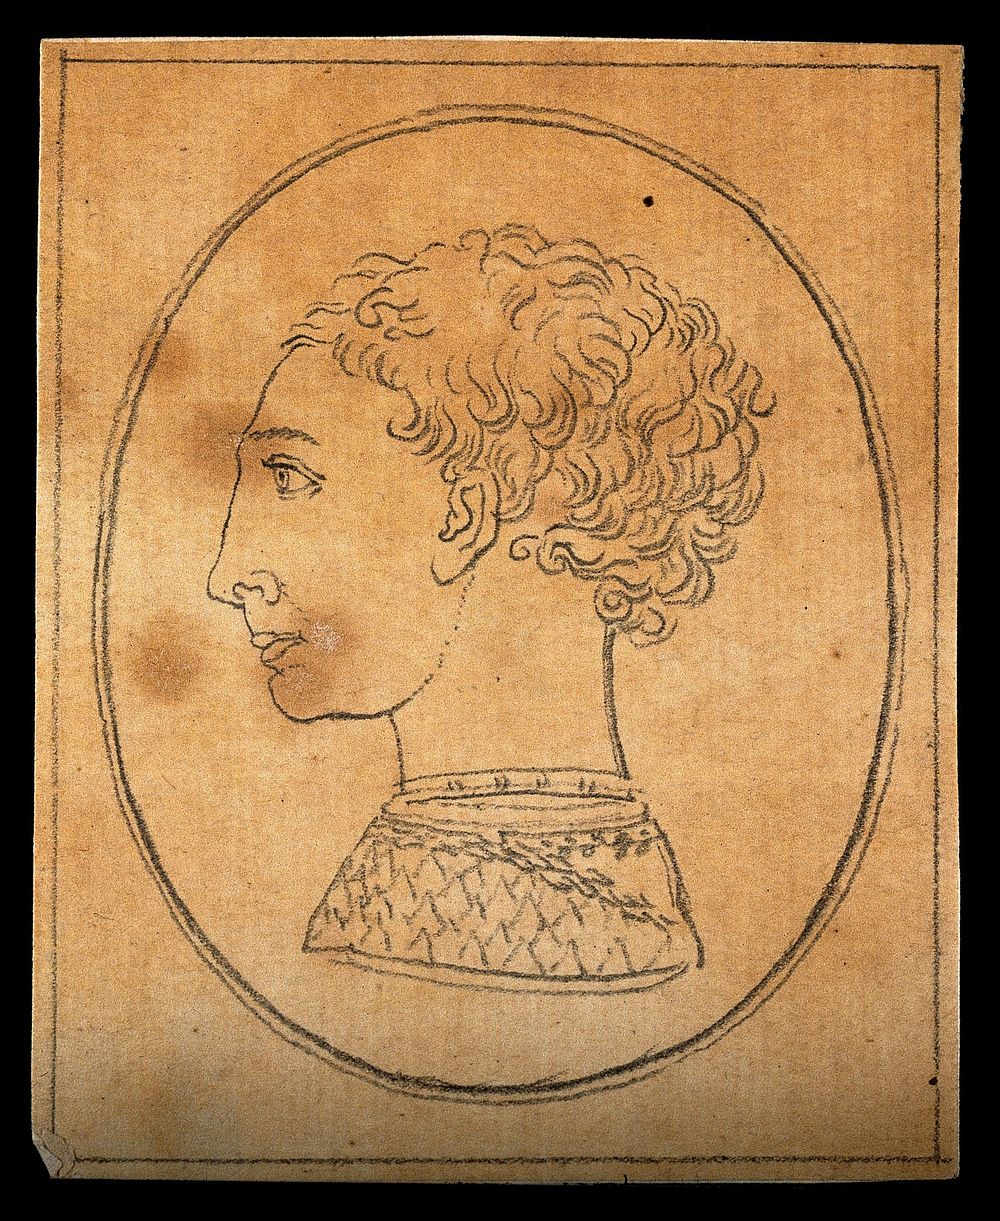 A physiognomy exemplifying what Lavater calls the 'homogeneity' of the face. Drawing, c. 1791.